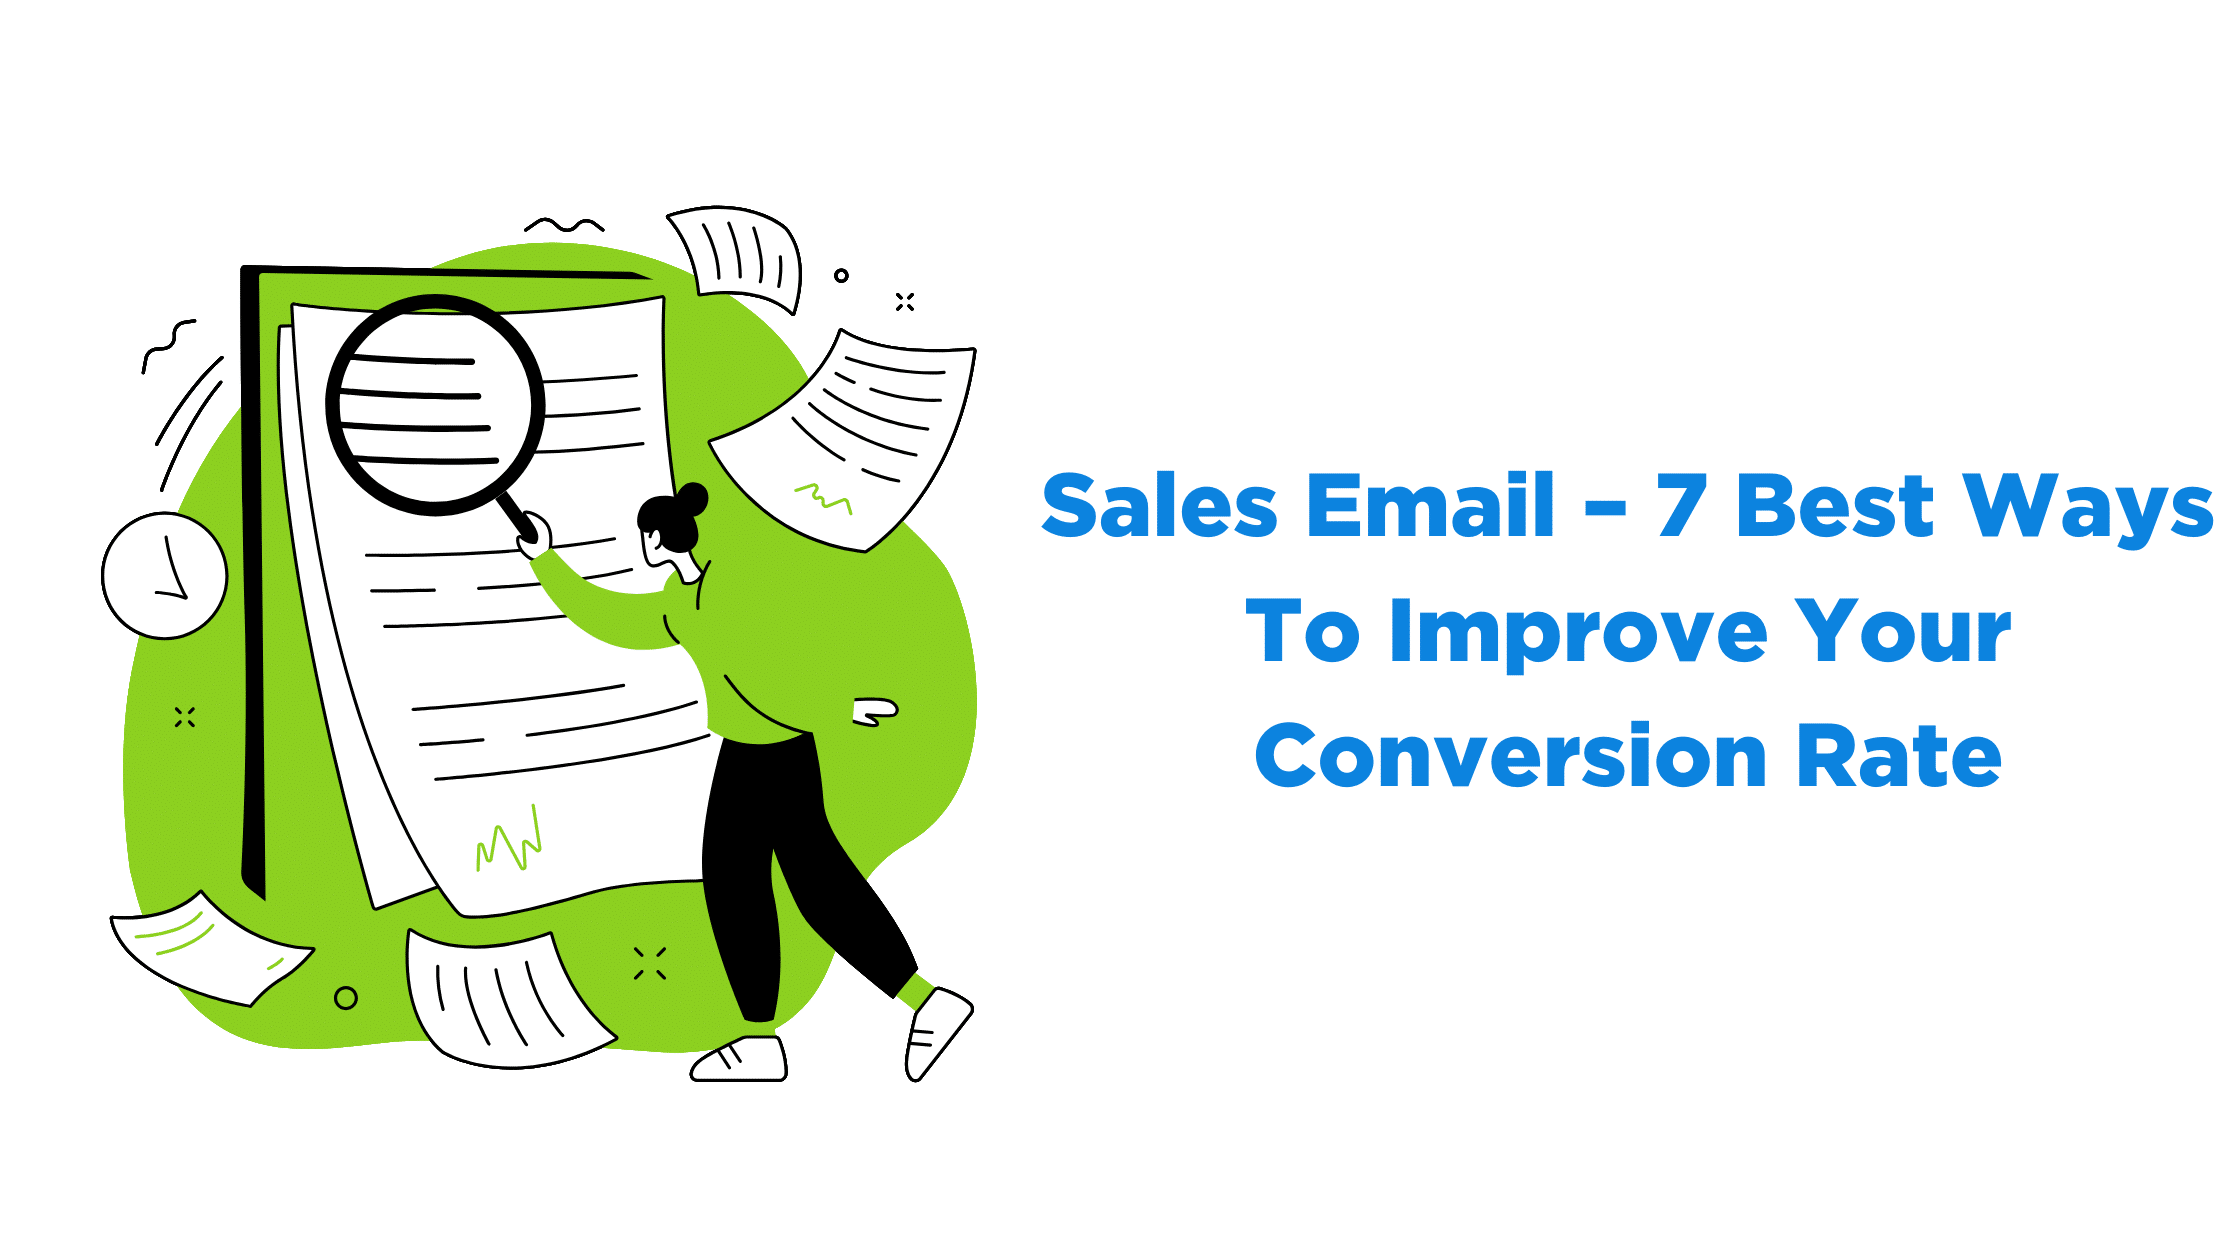 Sales Email – 7 Best Ways To Improve Your Conversion Rate